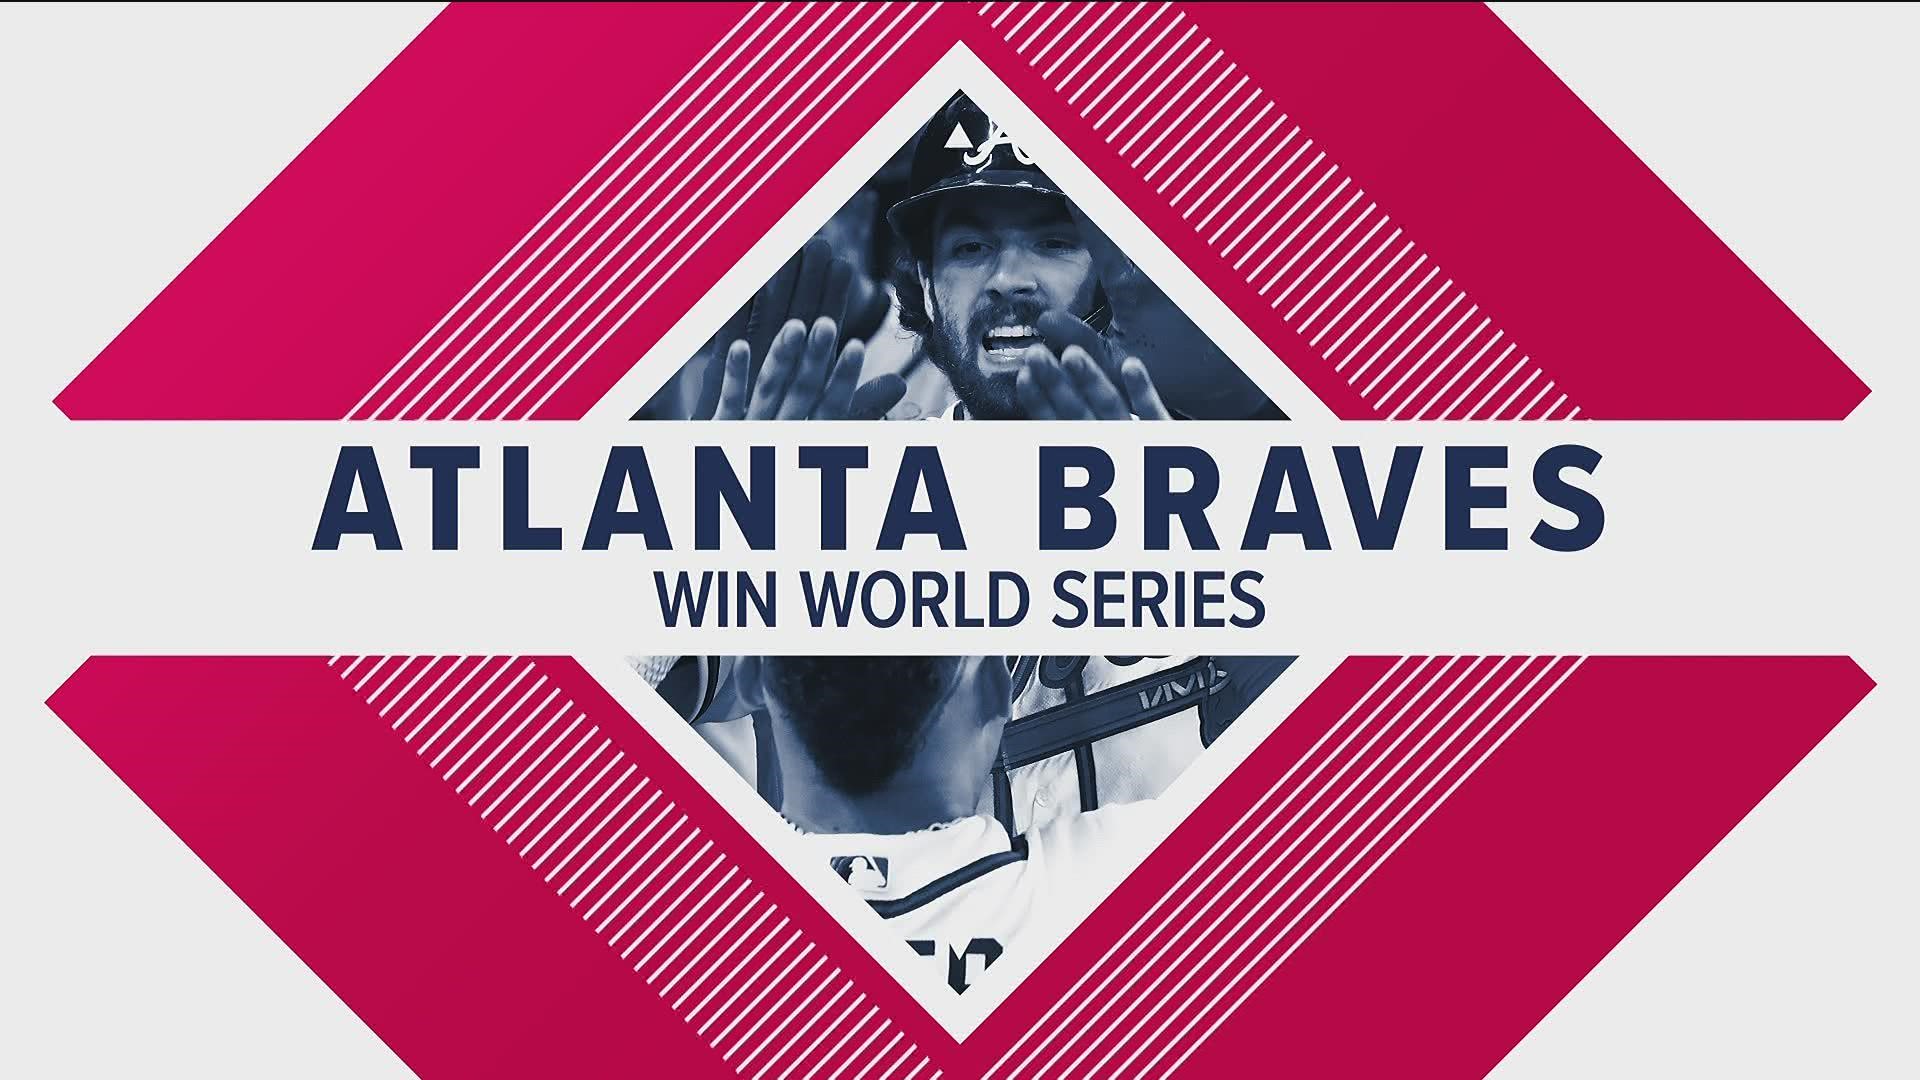 Governor Brian Kemp has declared Nov. 5 as Atlanta Braves Day following the team's victory at the World Series.